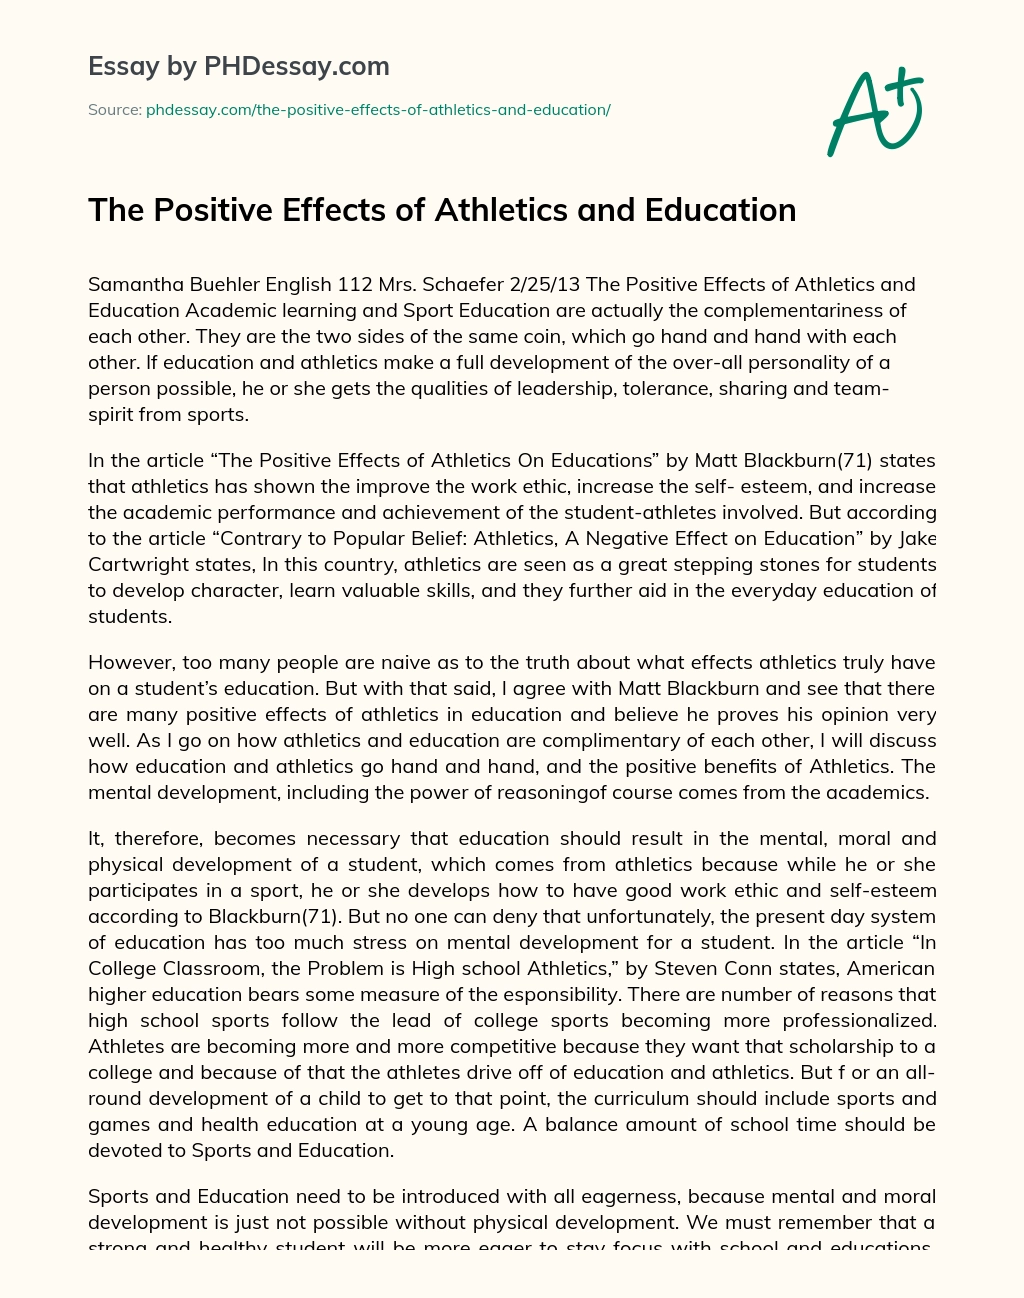 The Positive Effects of Athletics and Education essay